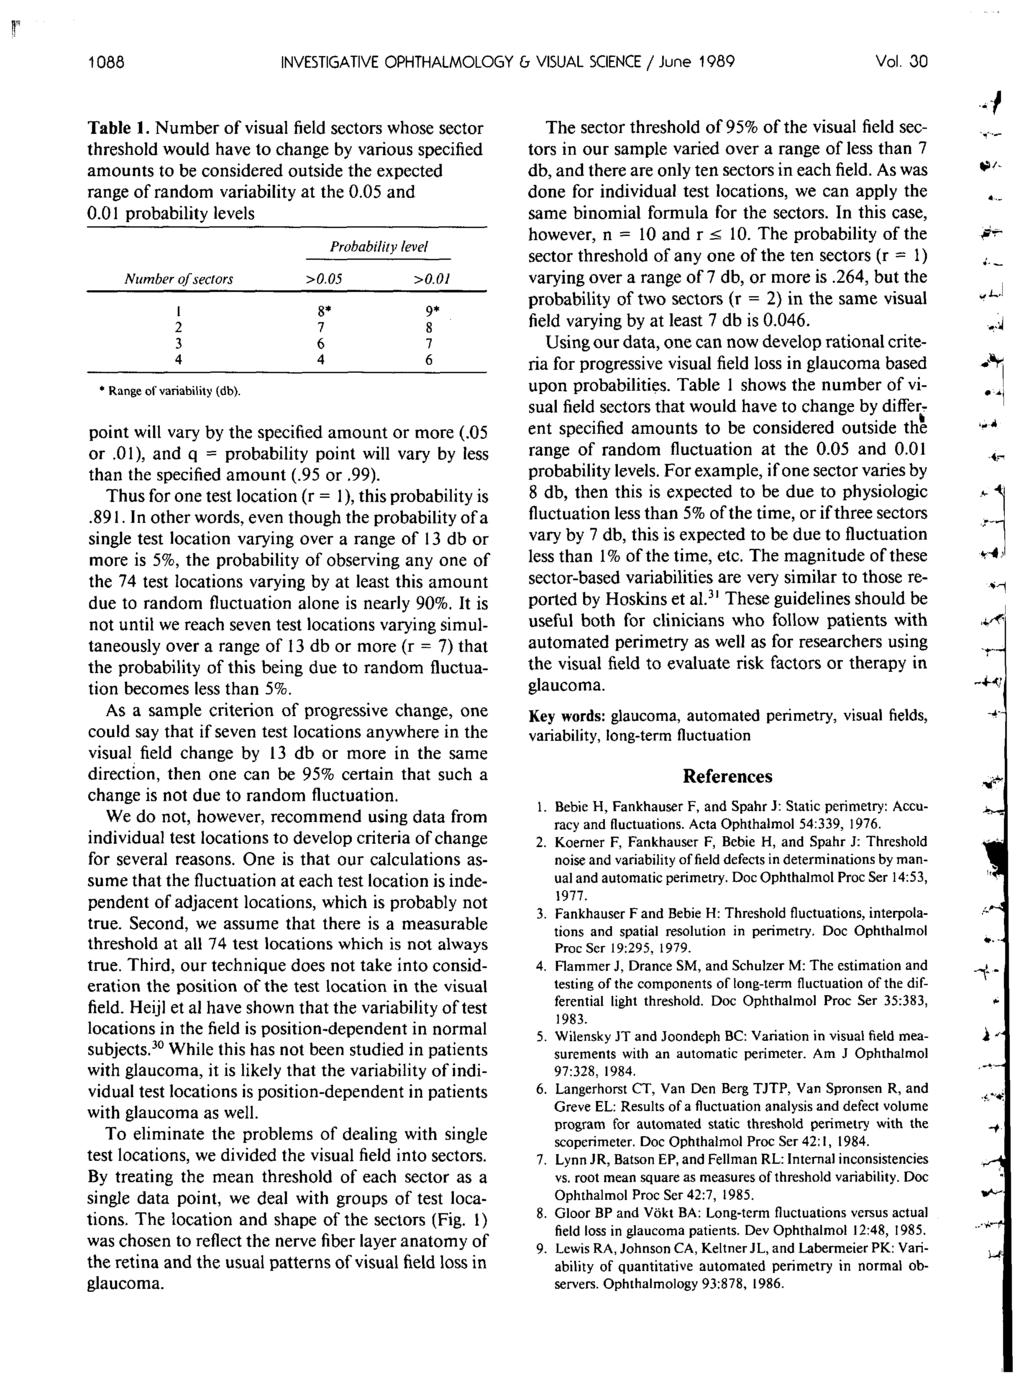 1088 INVESTIGATIVE OPHTHALMOLOGY & VISUAL SCIENCE / June 1989 Vol. 30 Table 1.